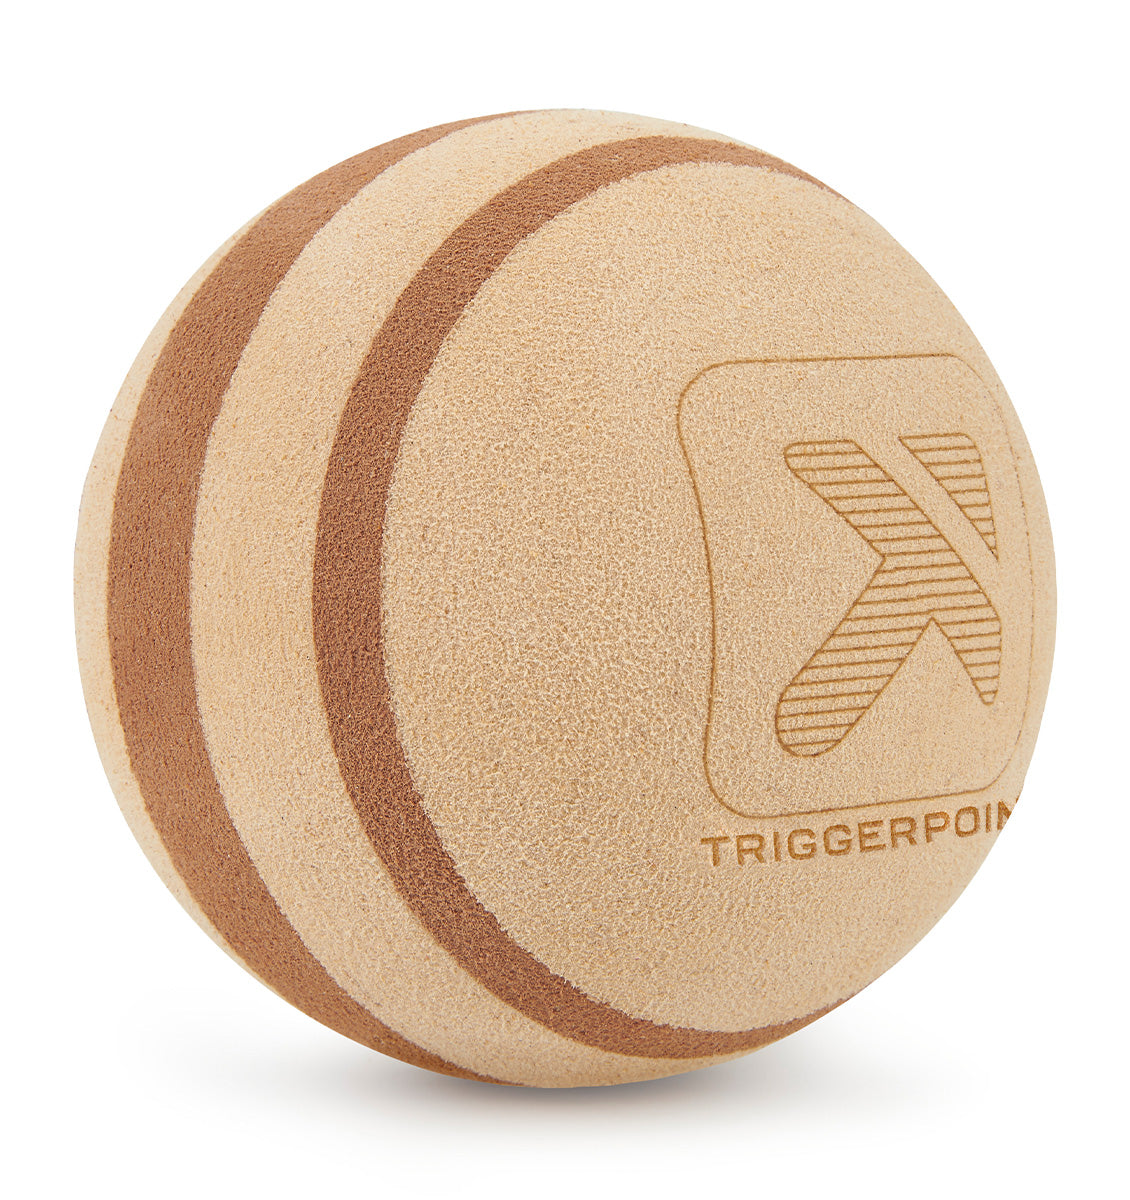 TriggerPoint MB5 Massage Ball - 5" - Eco - 2